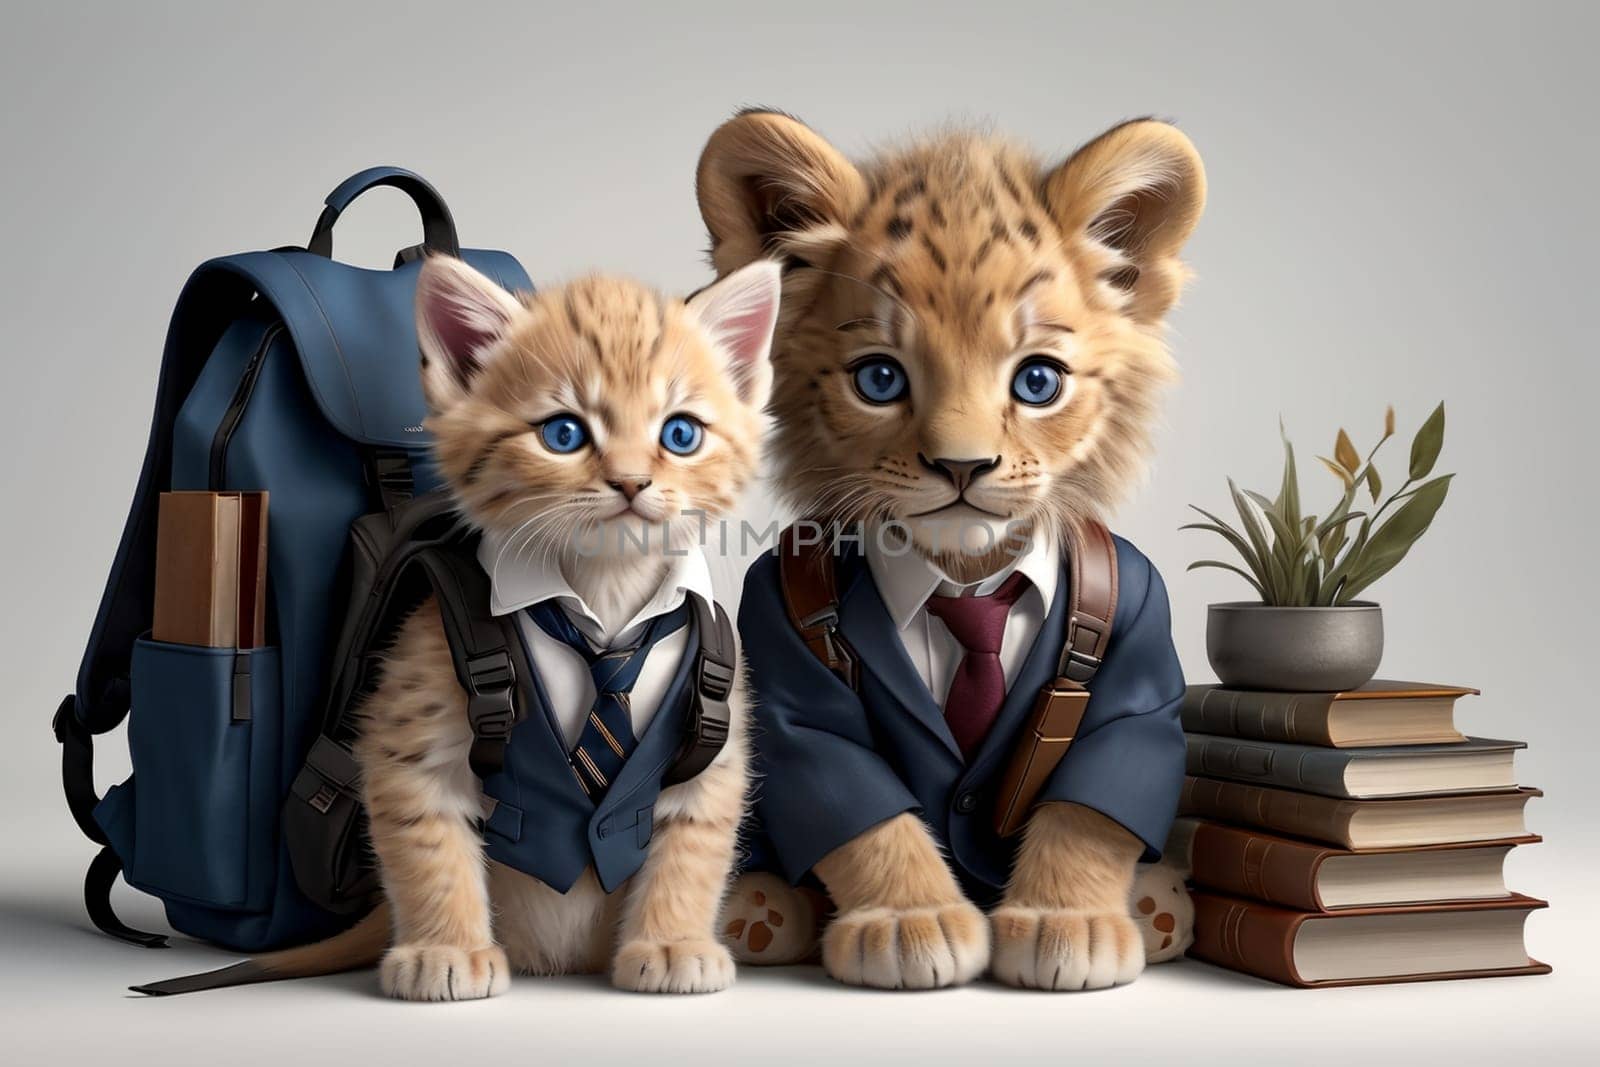 tiger cub and kitten schoolchildren with backpack and textbooks .